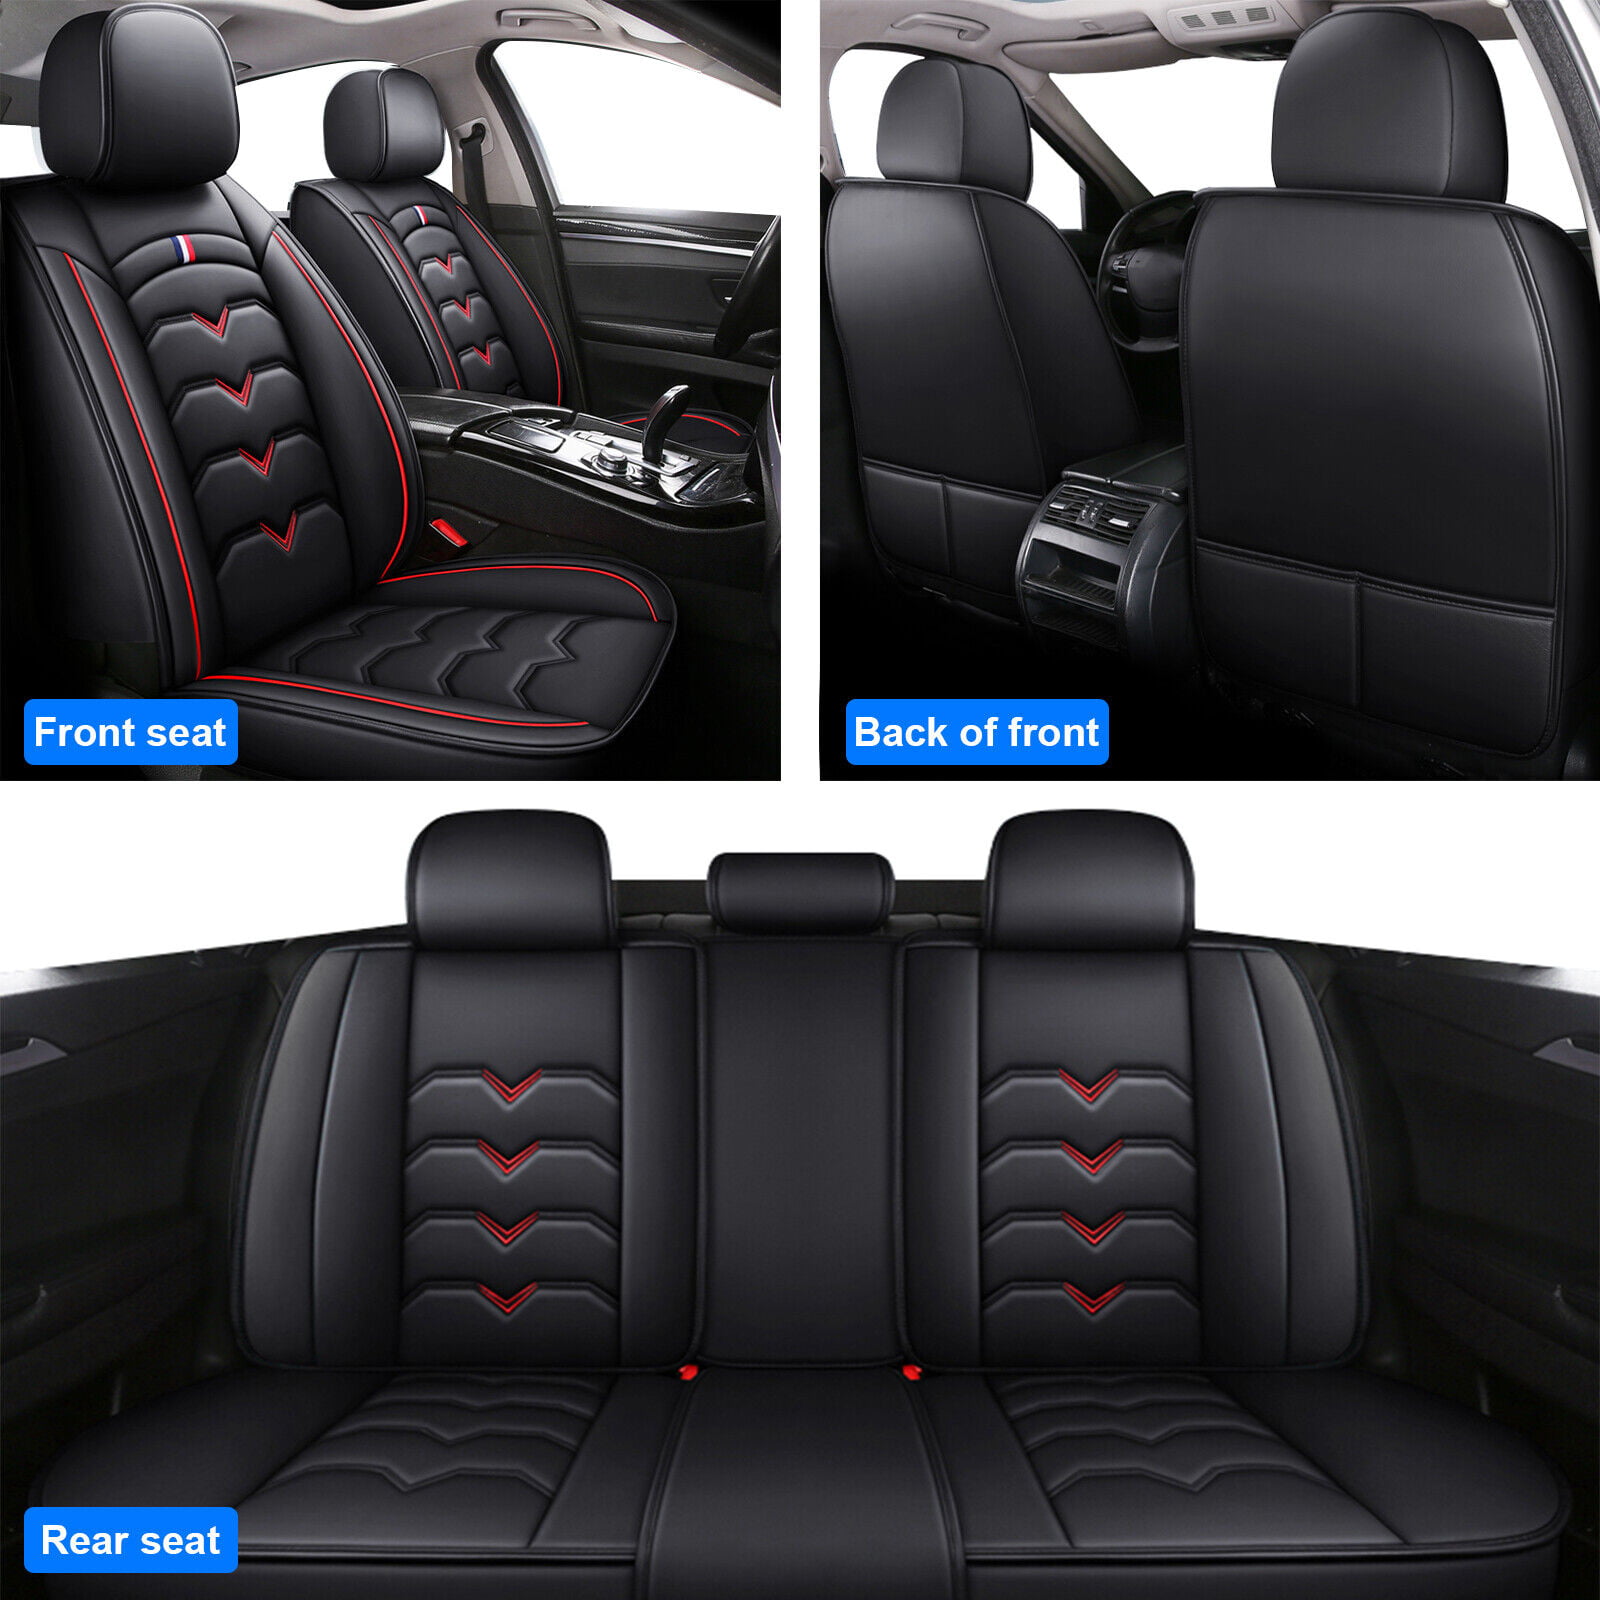 Car Seat Covers for Subaru 5 Seats Full Set, Waterproof Leather Front Rear  Seat Protector for Impreza Legacy Outback Ascent Crosstrek WRX STI,  Black&Pink 